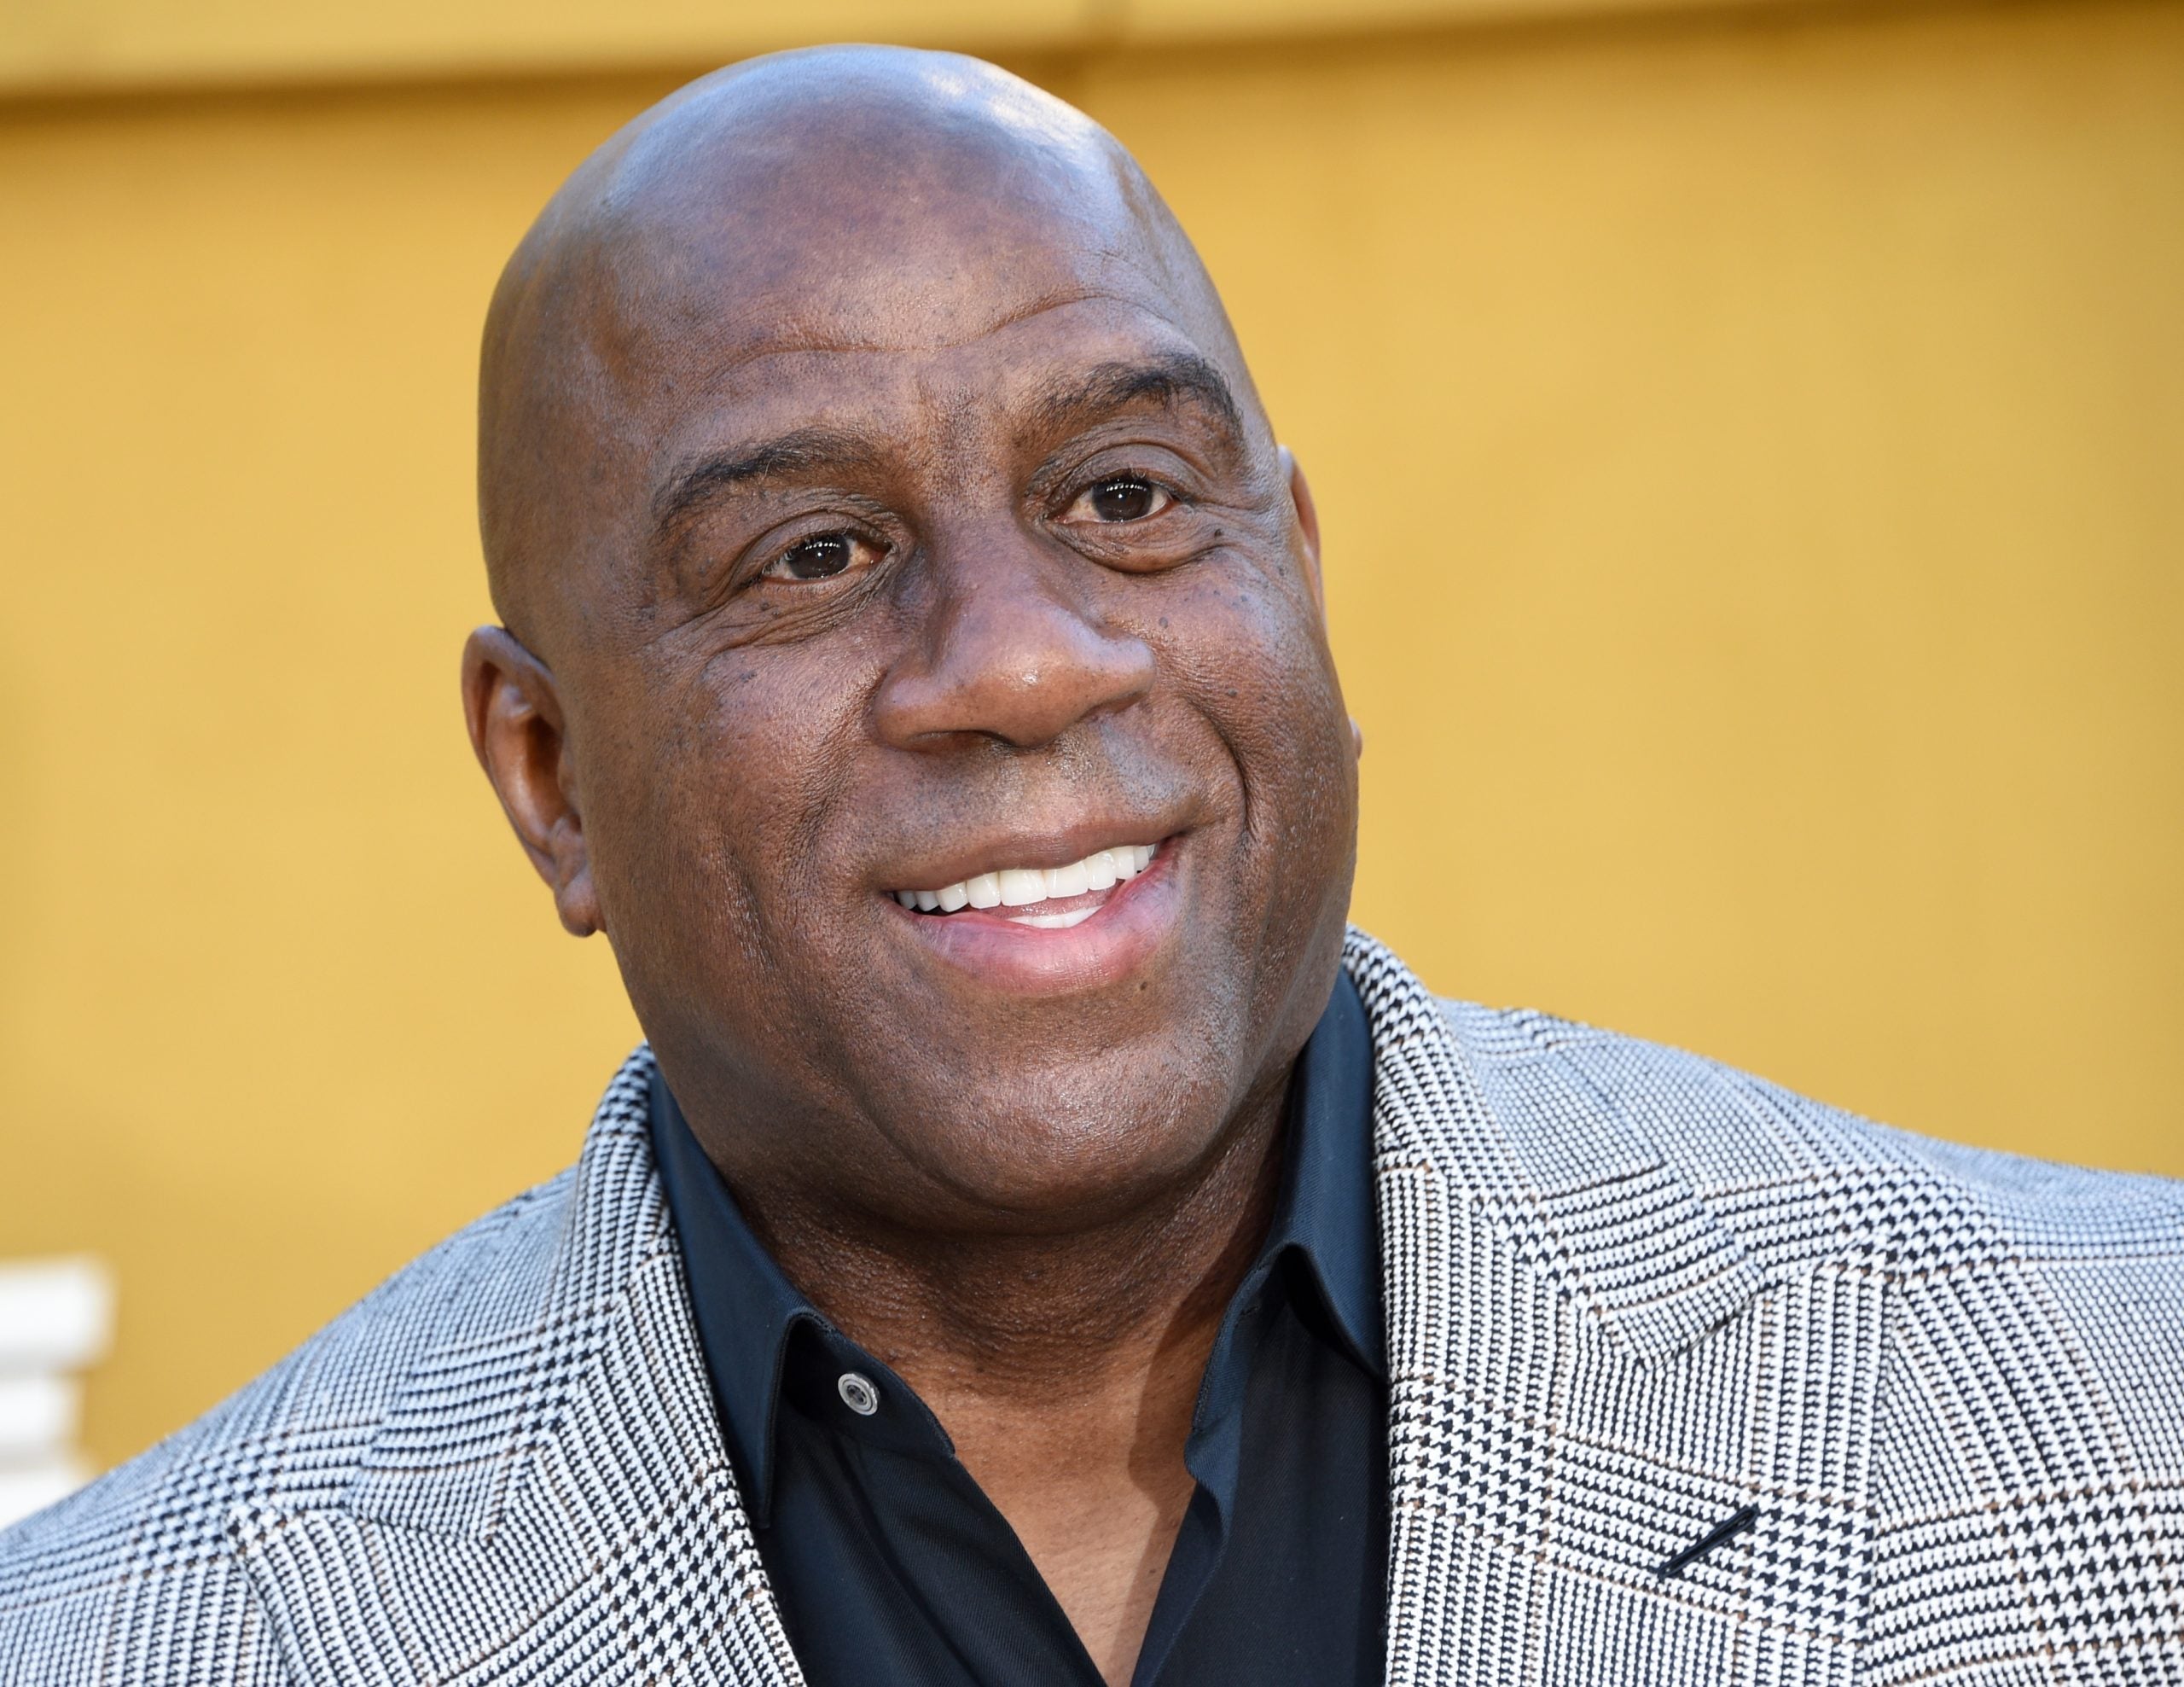 Magic Johnson Is Aiming To Buy Washington Commanders In What Will Make Him One Of The Few Black NFL Owners